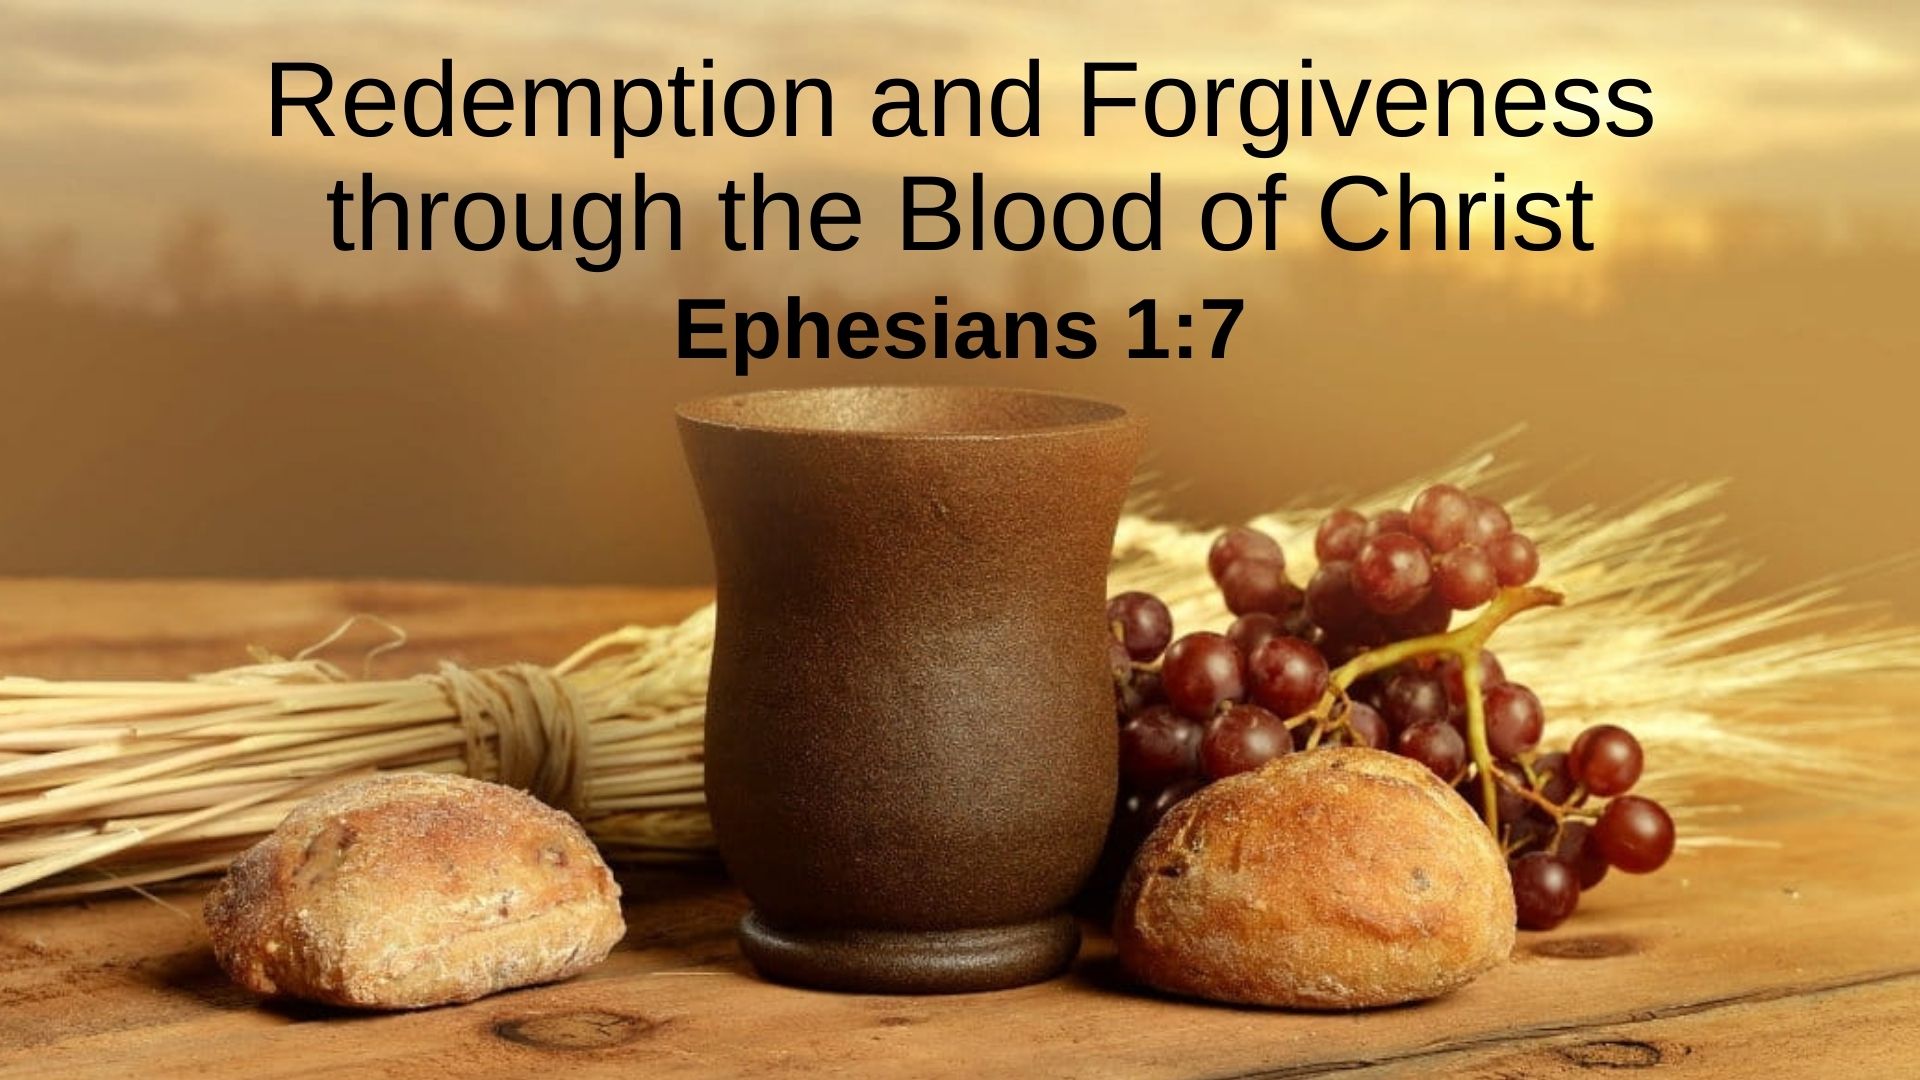 Redemption and Forgiveness through the Blood of Christ Image